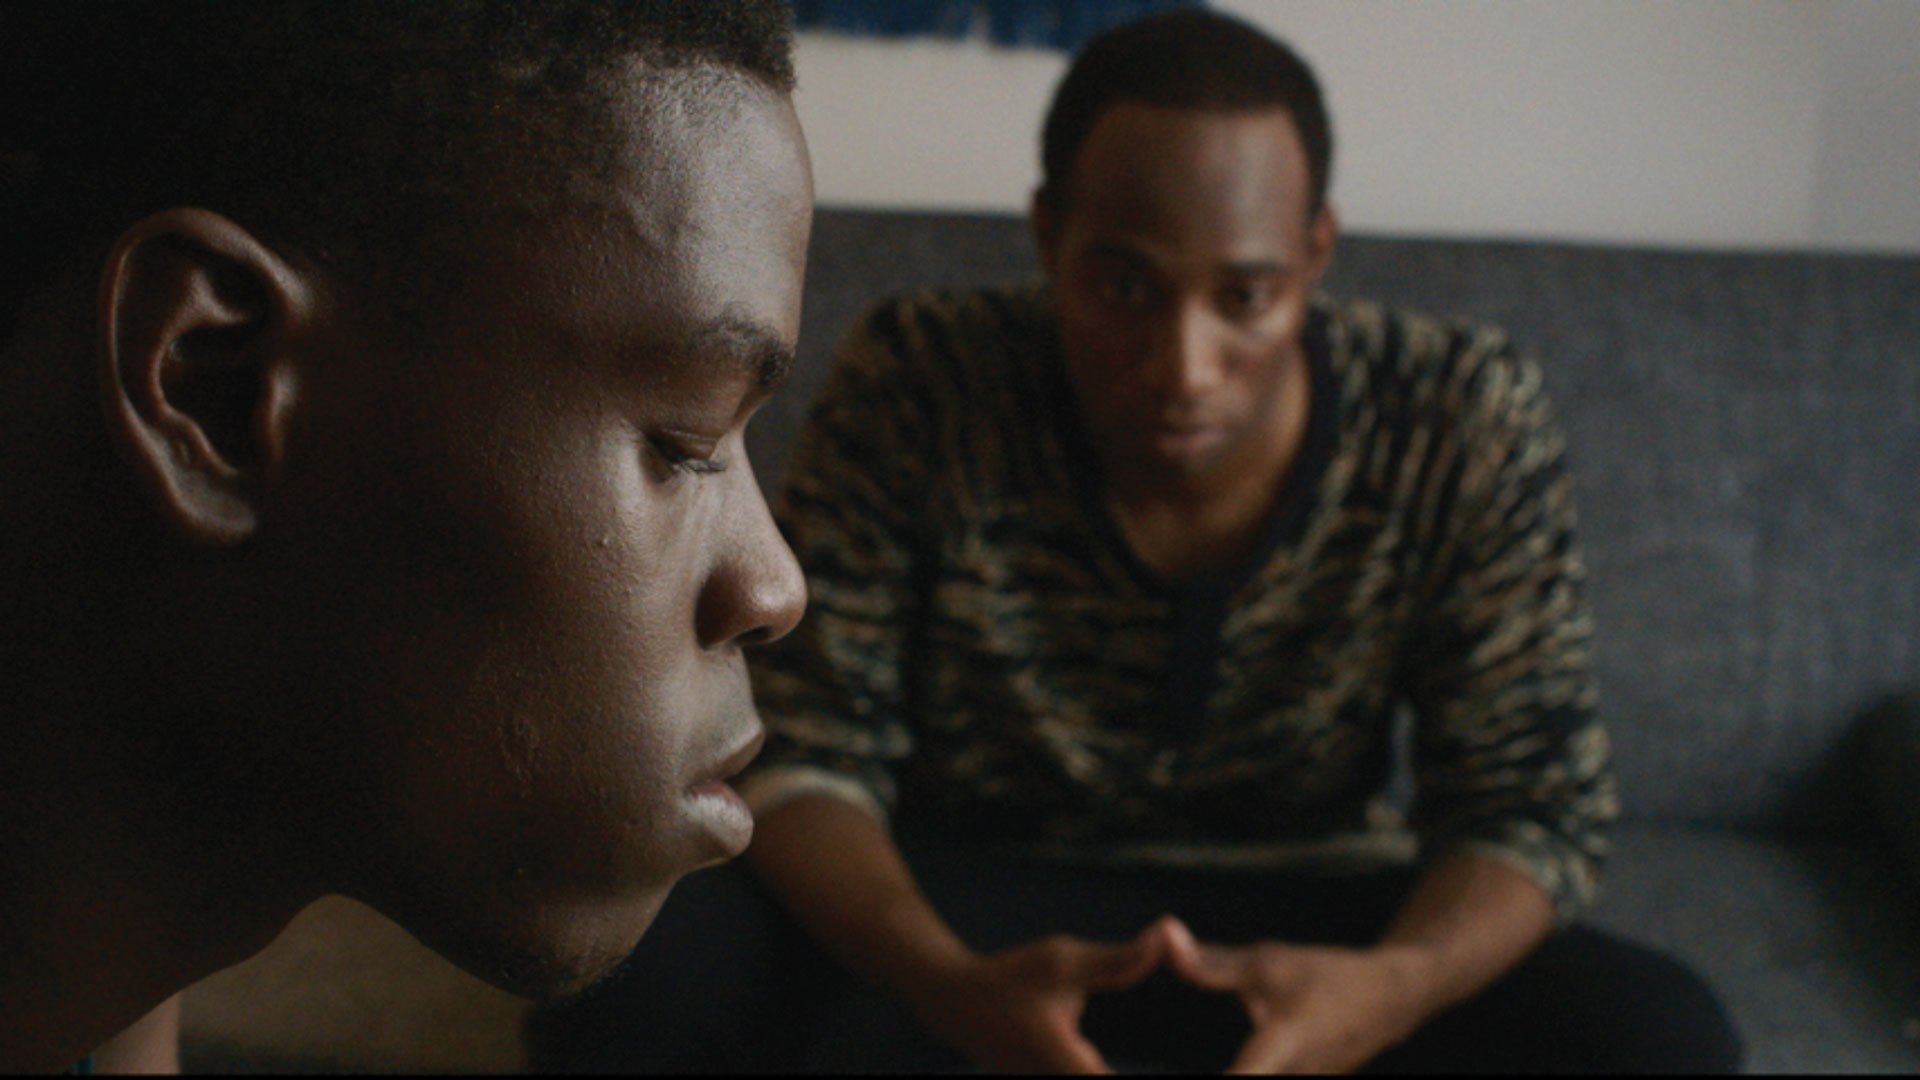 Naz And Maalik - Independent Feature Film